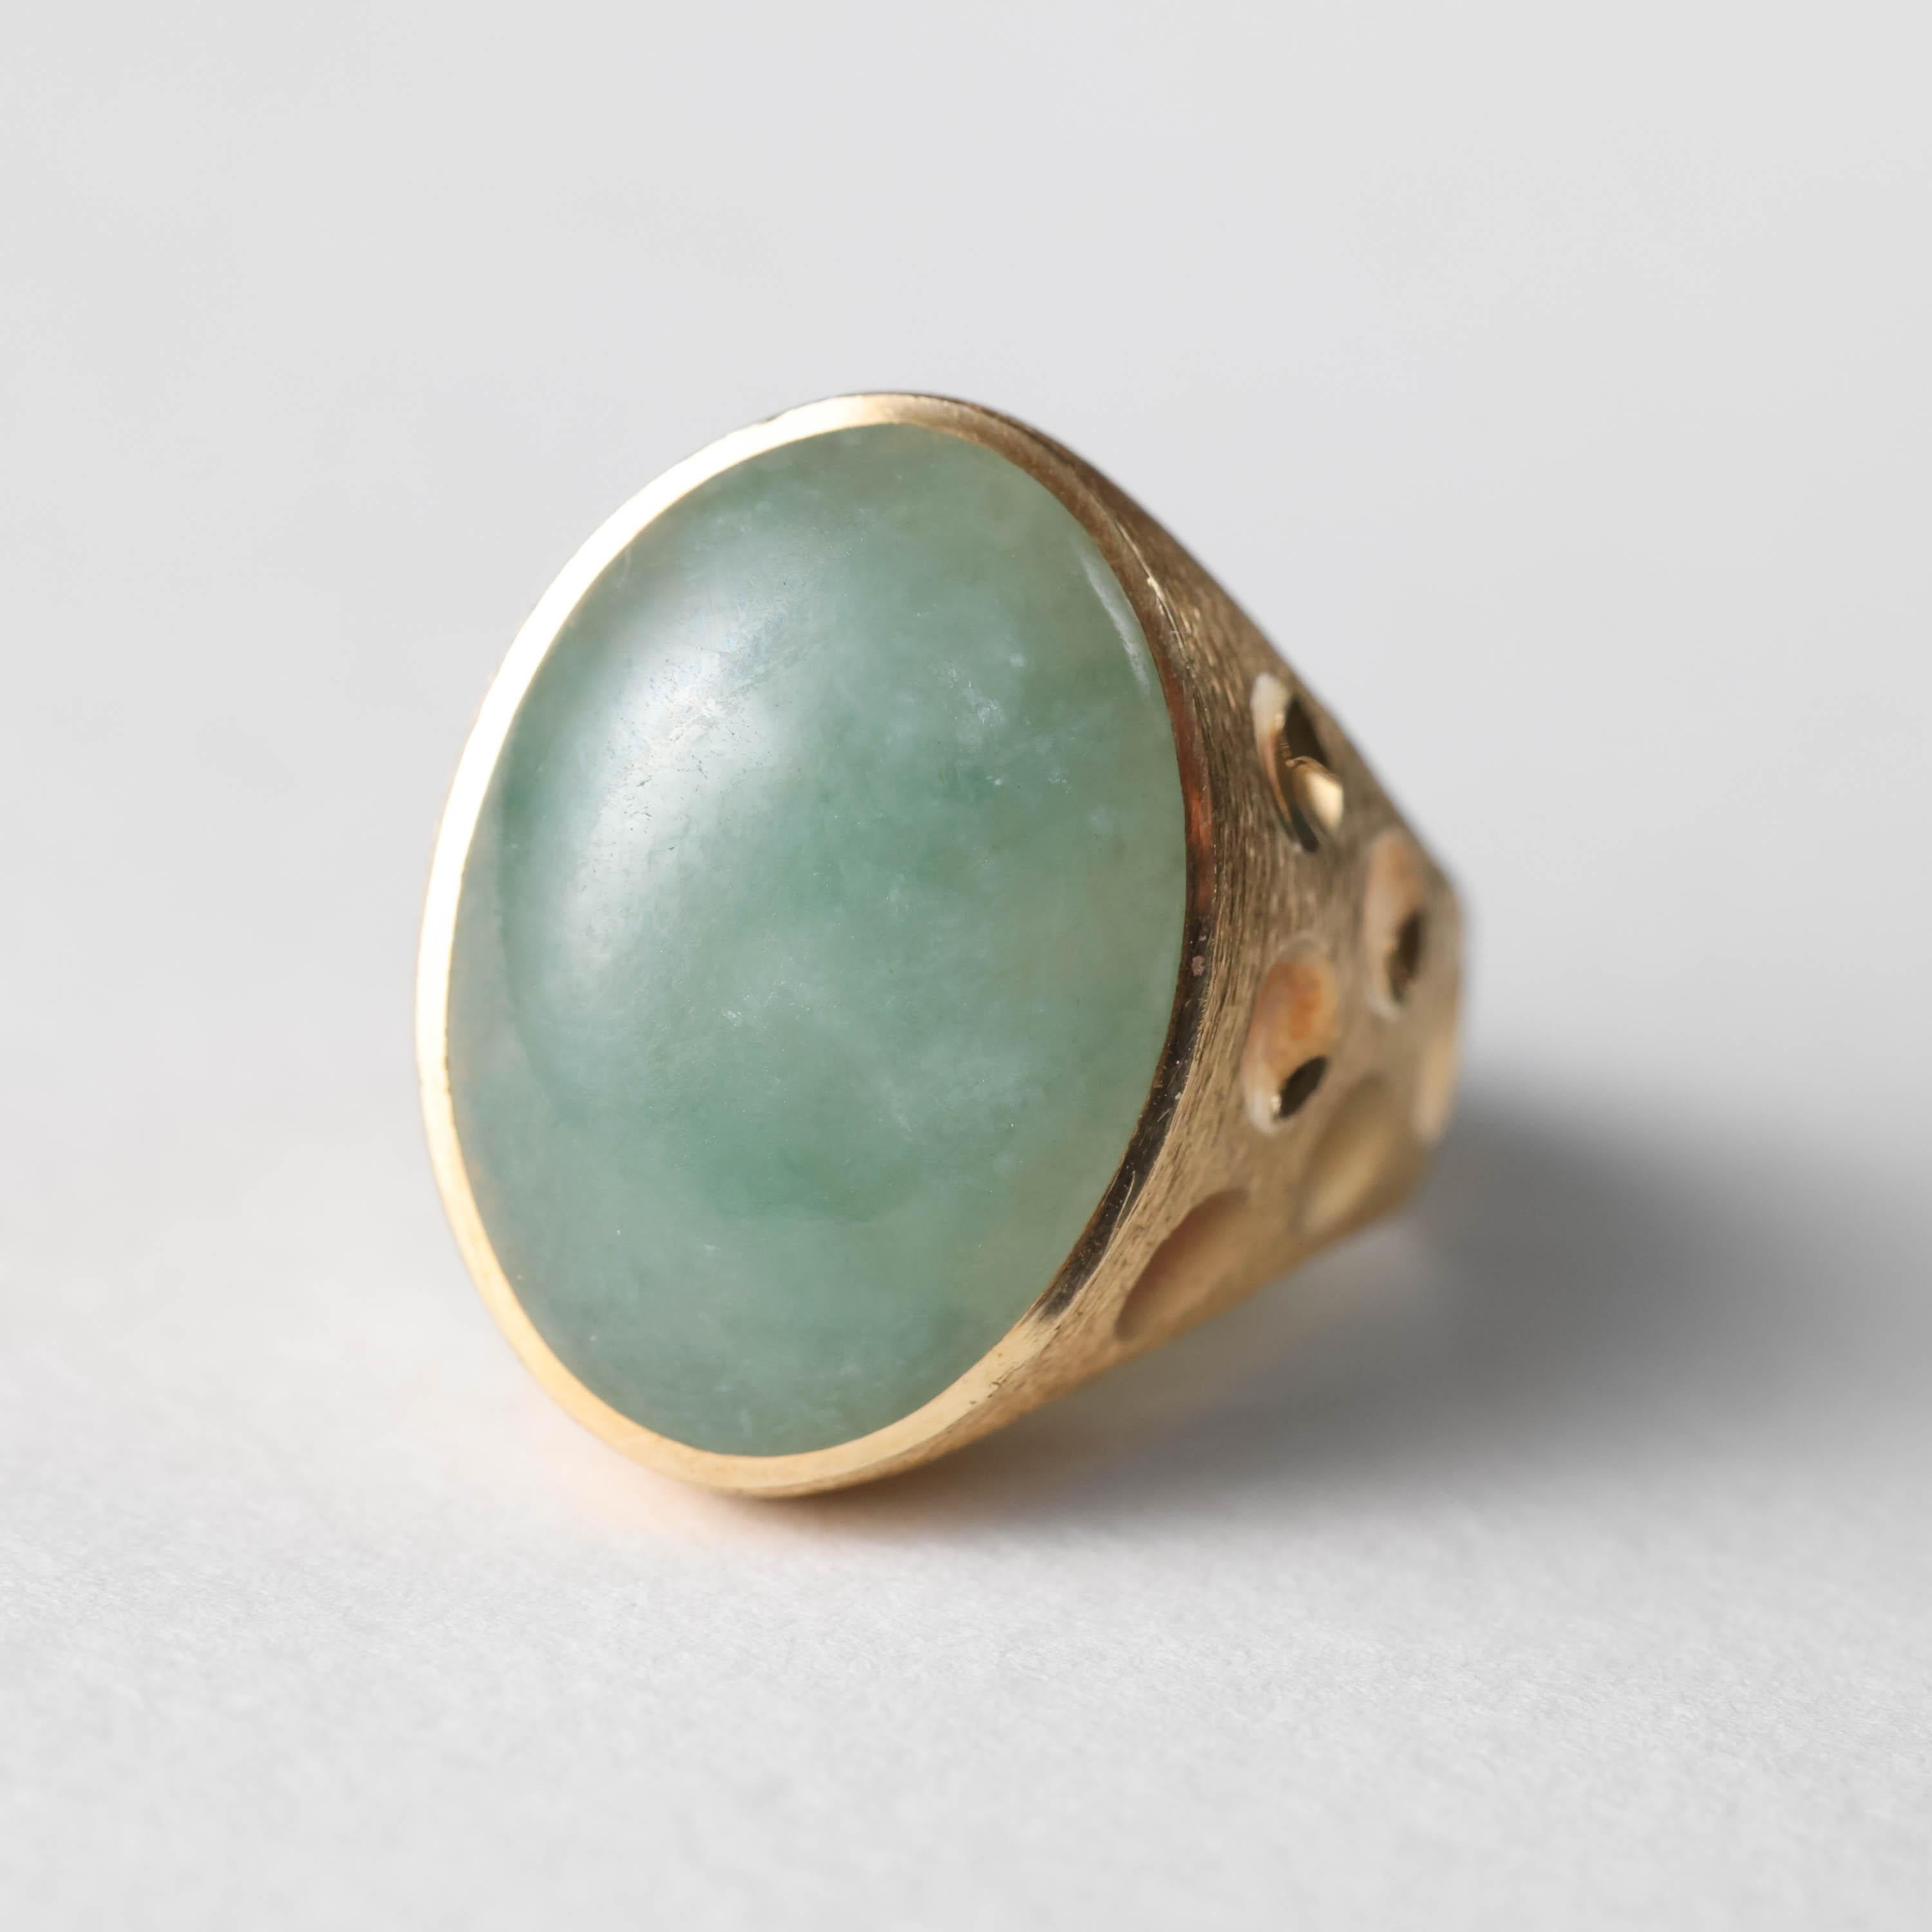 This is one substantial -and substantially cool- jadeite jade ring from the middle of the last century (circa 1960s). This Mod and modern, natural and untreated Burmese jadeite ring is incredibly impressive and the very definition of